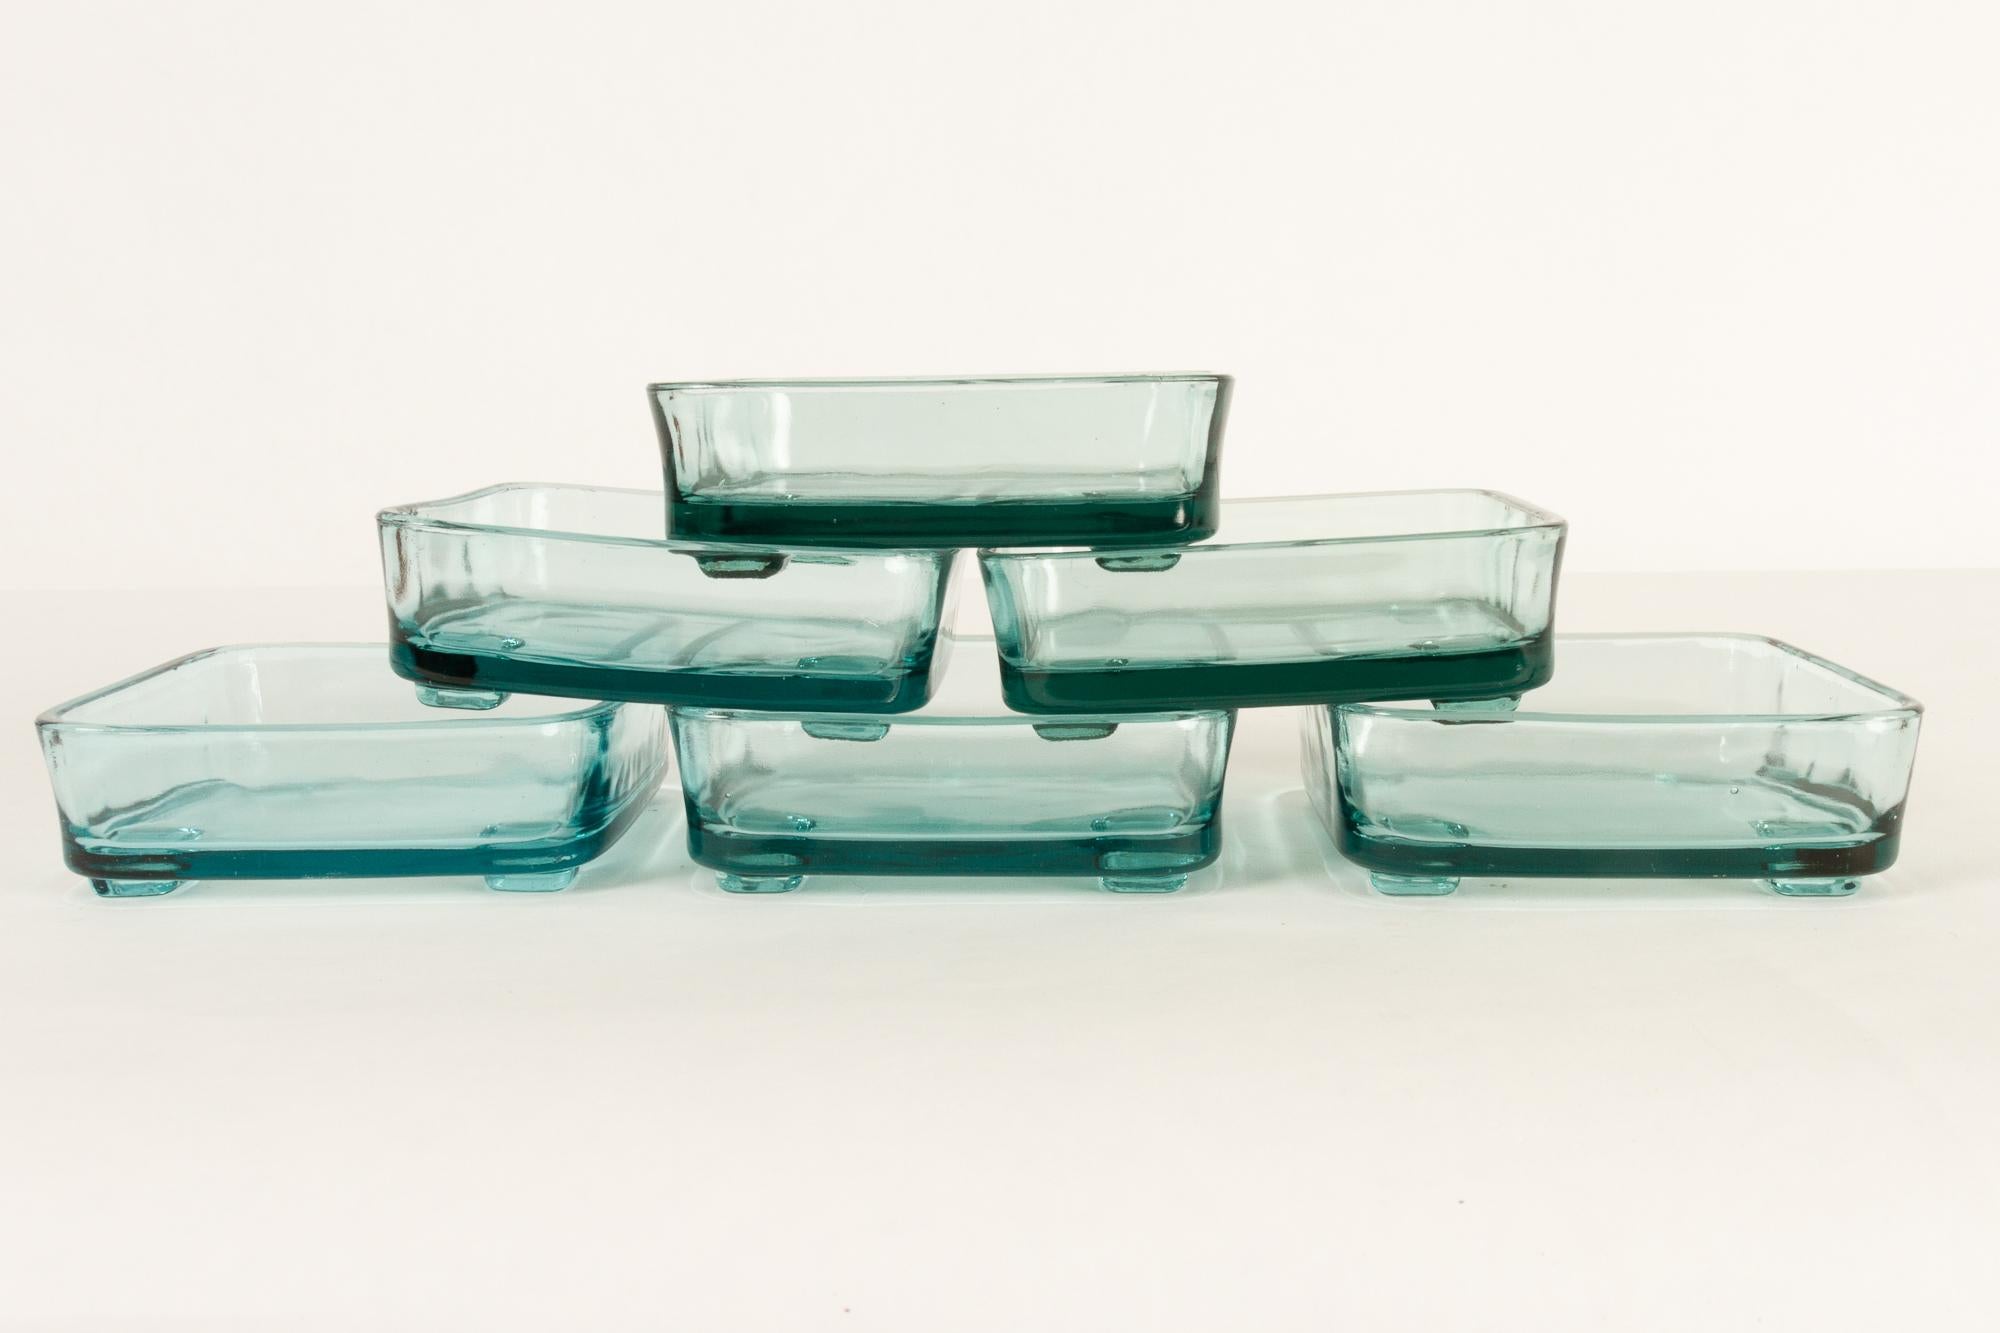 Vintage Danish Teak Tray with Glass Bowls by Jens Harald Quistgaard, 1960s For Sale 2